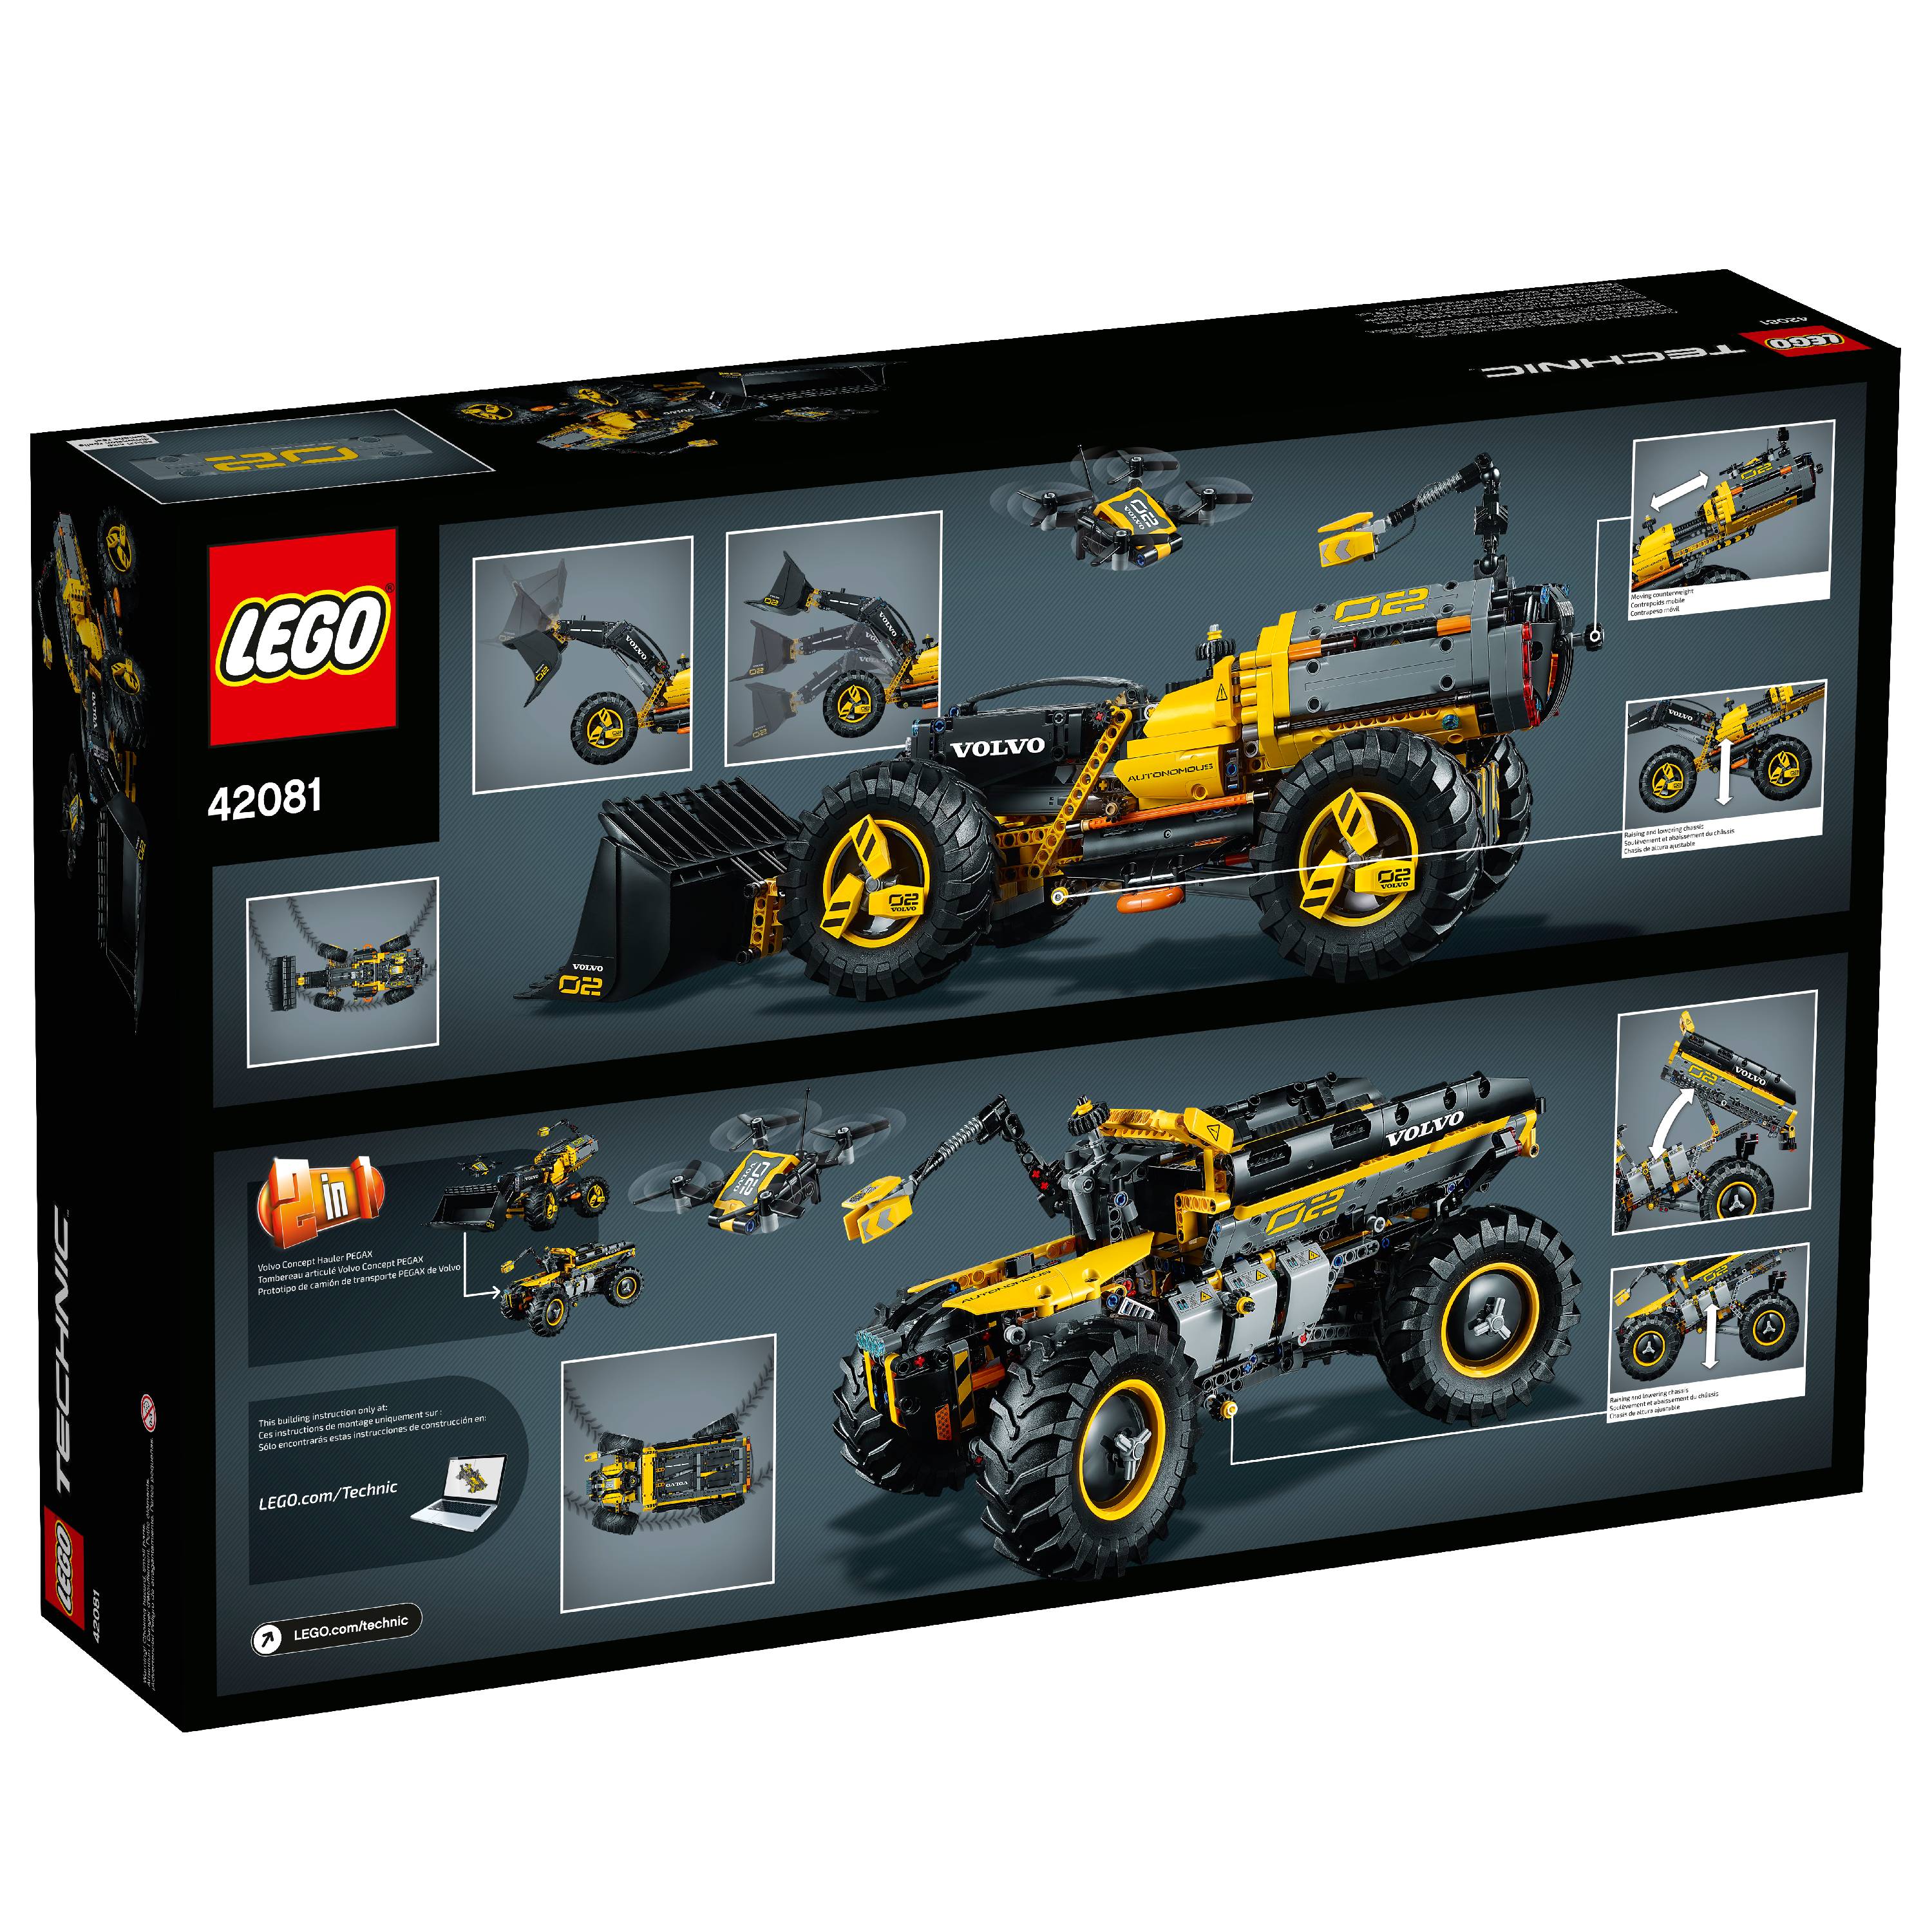 LEGO Technic Volvo Concept Wheel Loader ZEUX 42081 - image 5 of 7